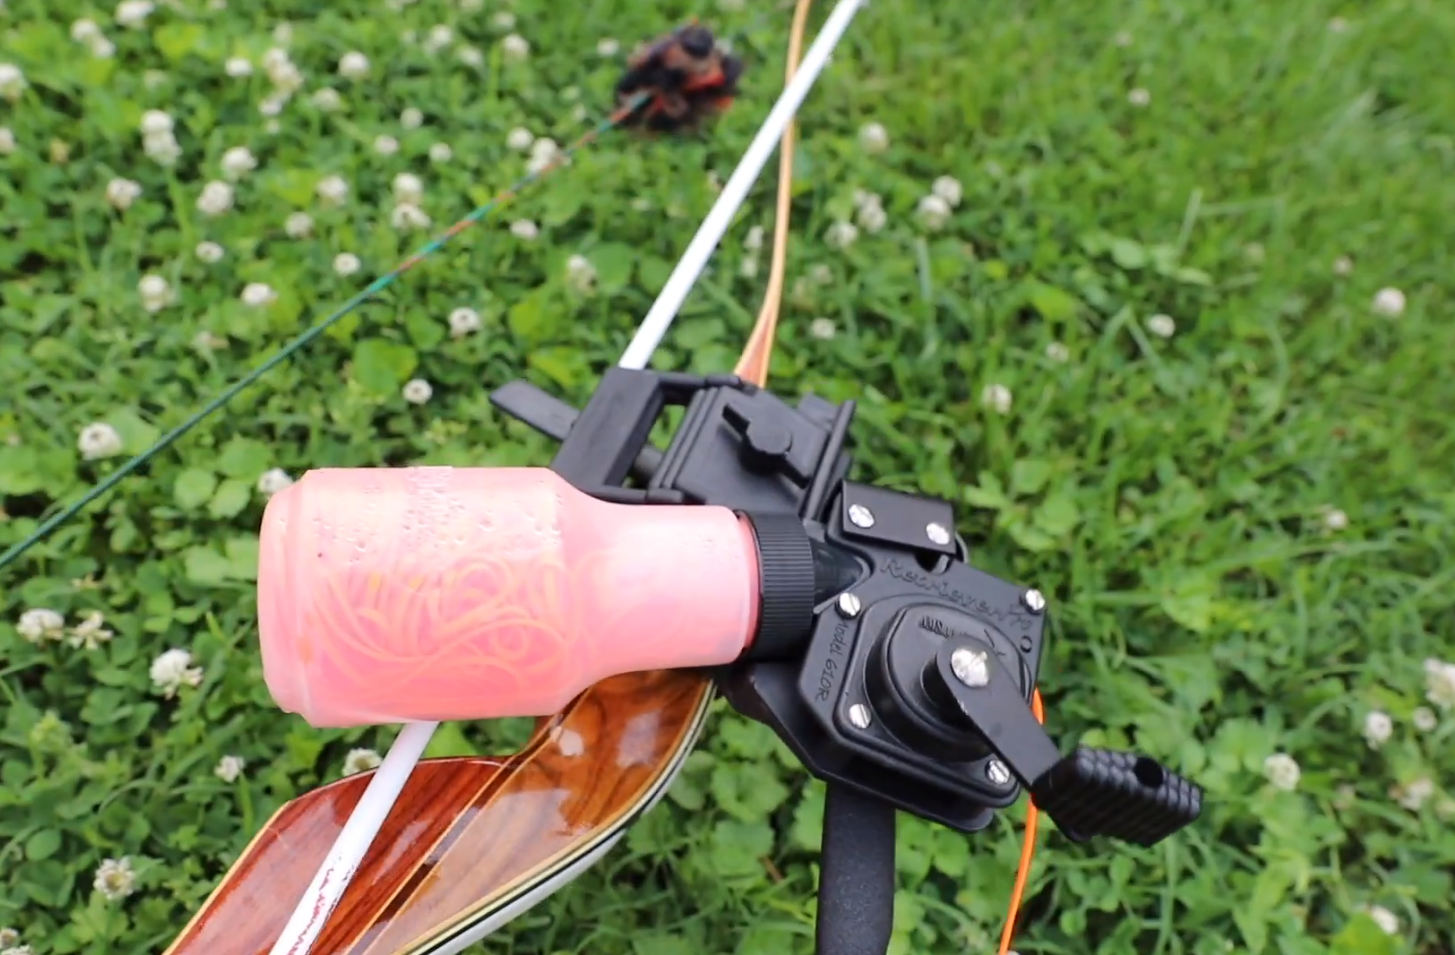 Video: What You Need To Start Bowfishing.